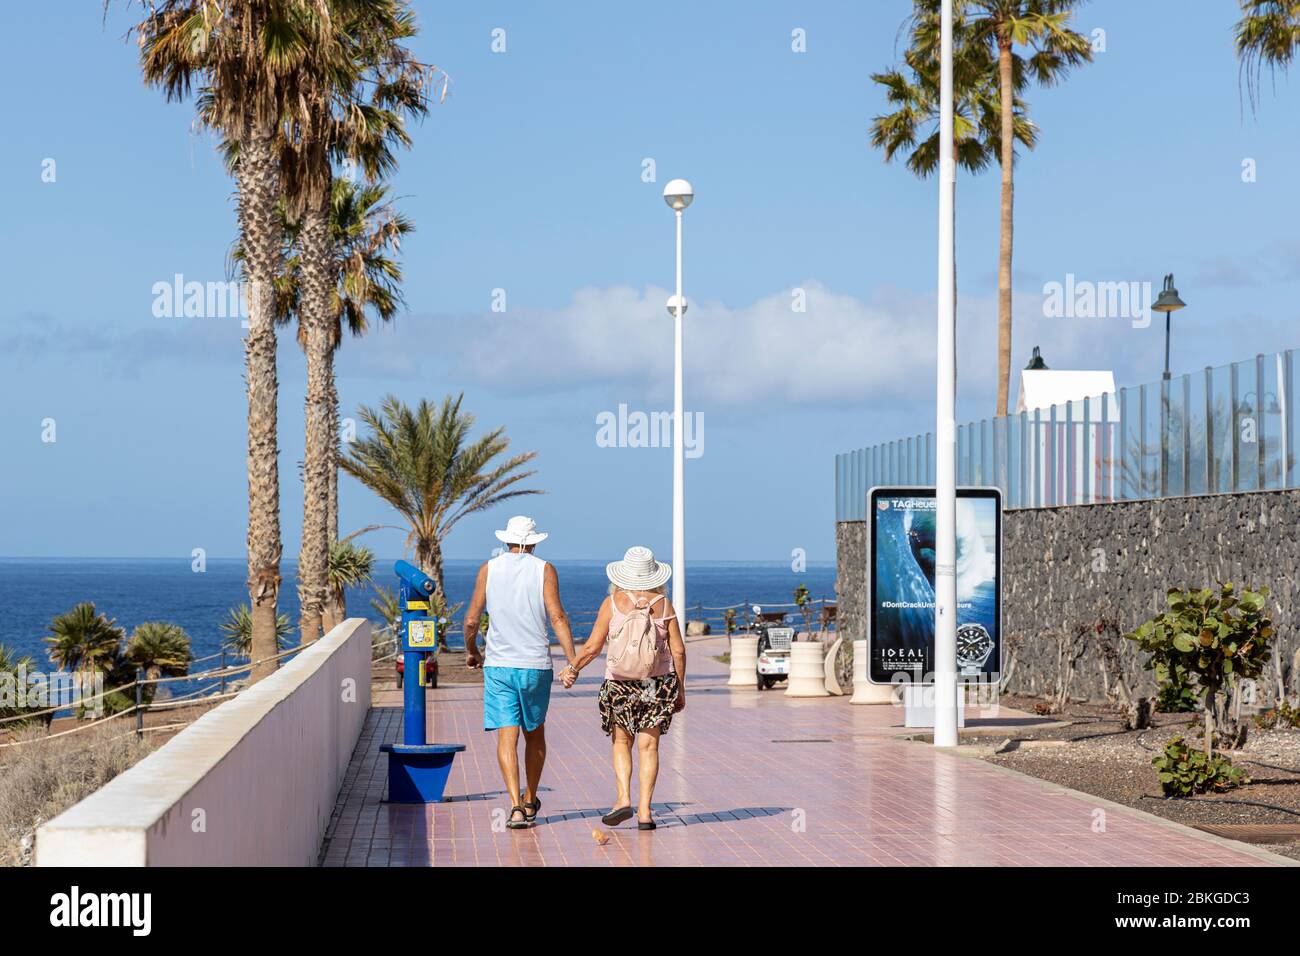 Costa Adeje, Tenerife, Canary Islands, 4 May 2020. As the Covid 19, Coronavirus state of emergency relaxes the lockdown, elderly are allowed out to exercise between the hours of 10AM and 7PM. An older couple walk hand in hand enjoying their new freedom on the promenade in Fanabe. Stock Photo